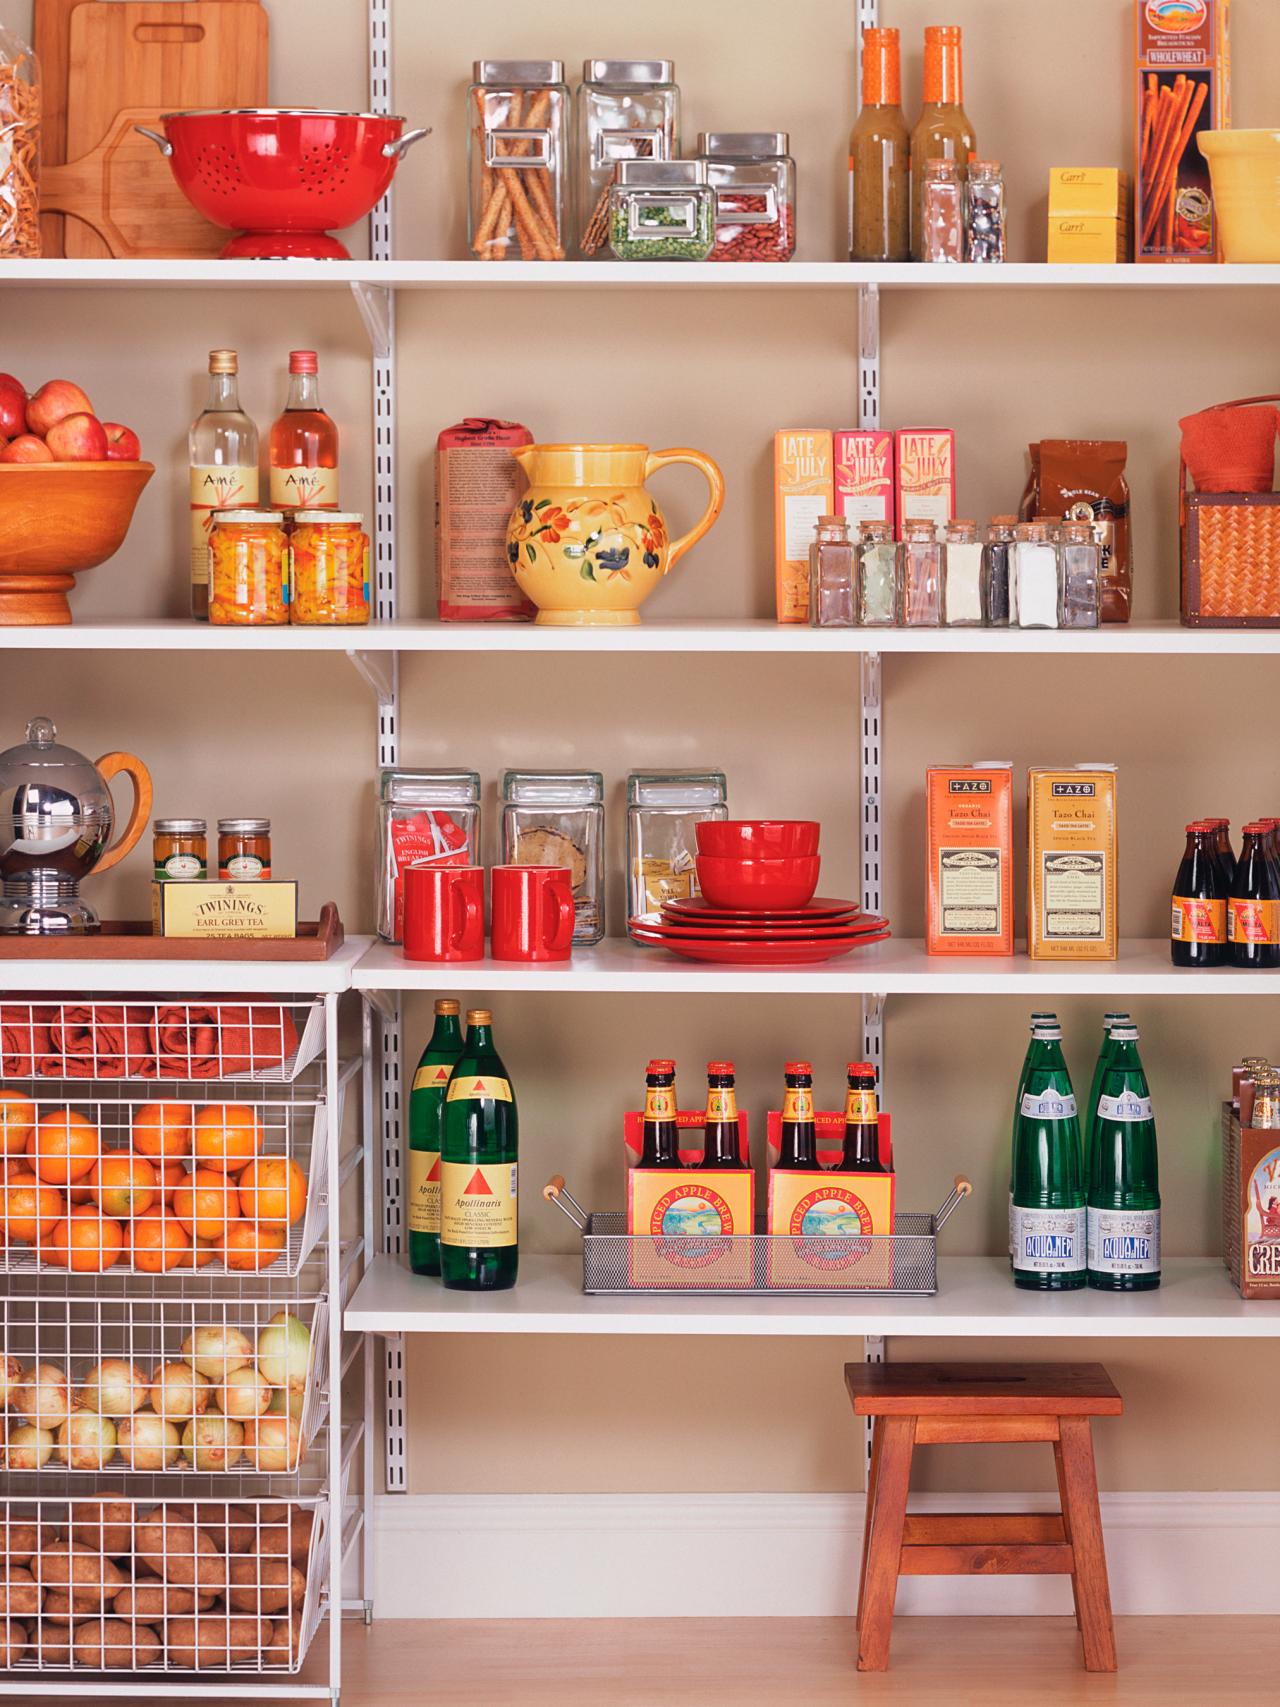 Adjustable shelves allow easy storage for food products of different heights.